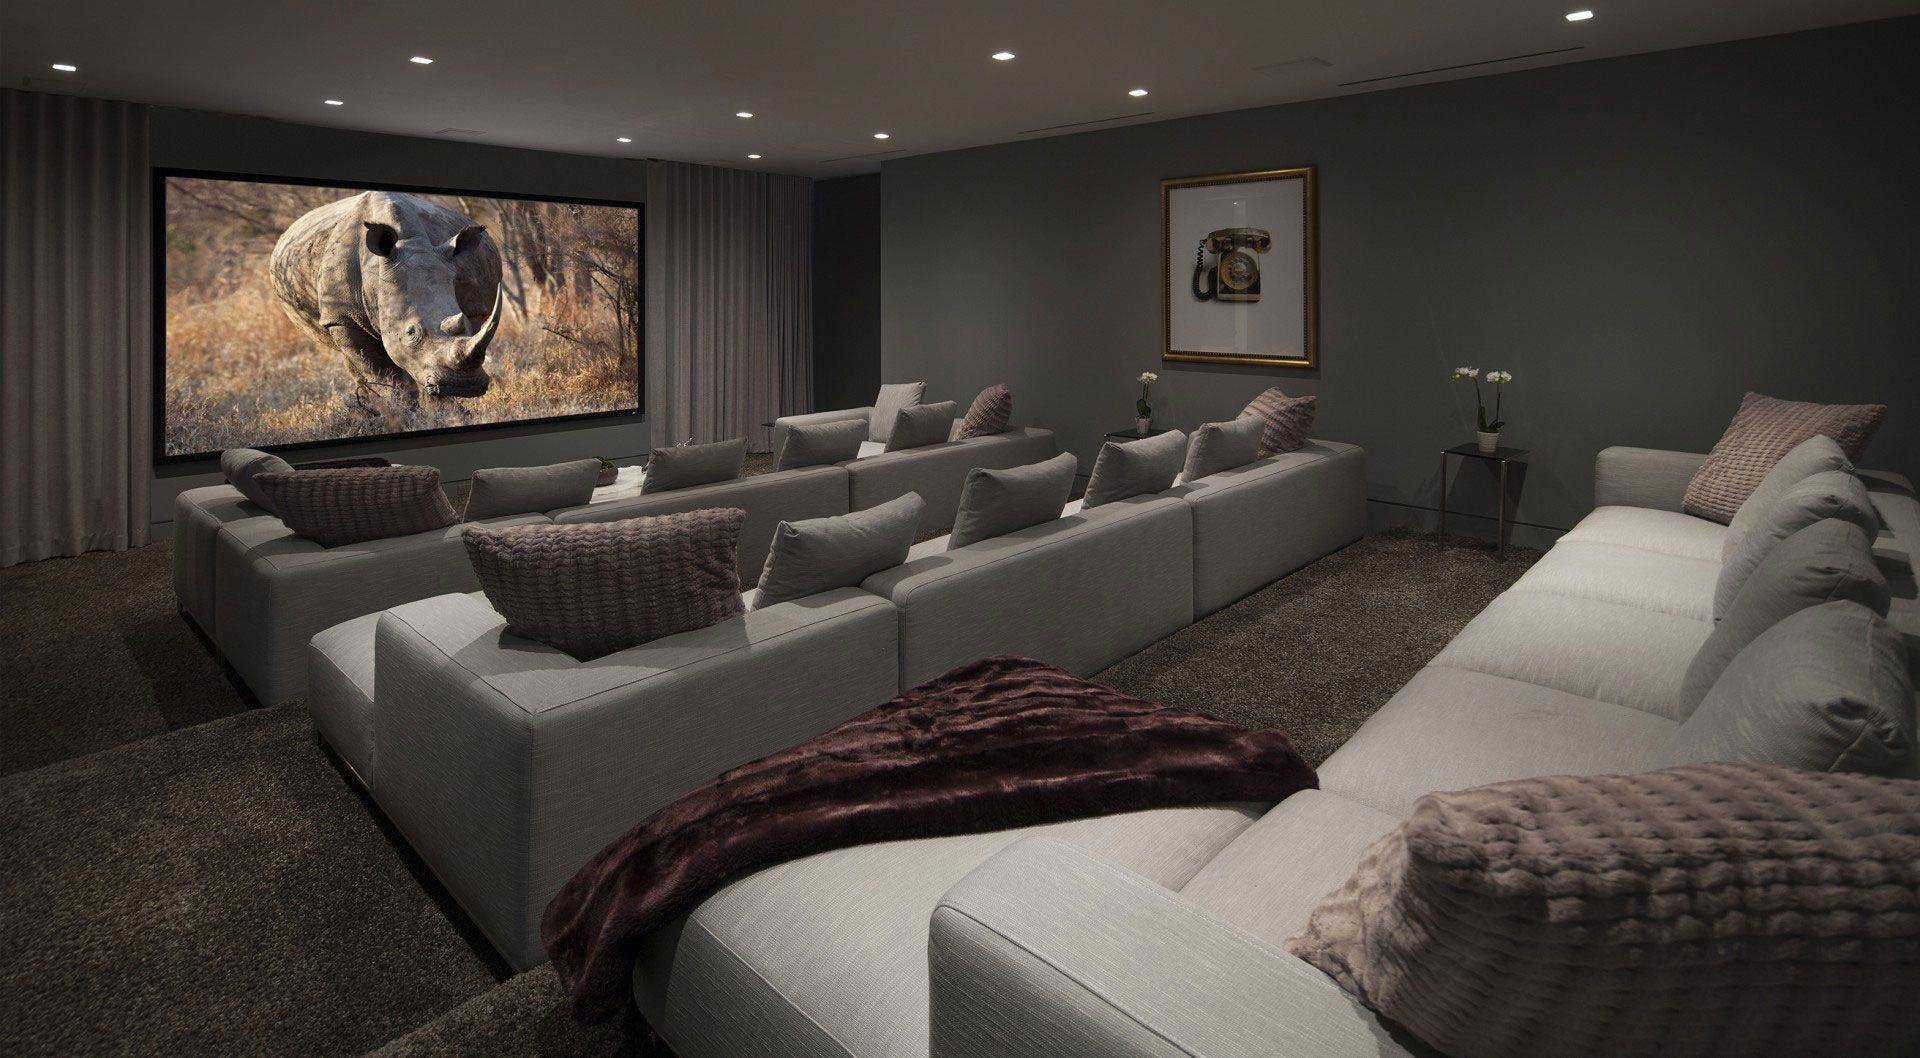 Black Home Theater Room: Enjoy A Captivating Cinema Experience At Home